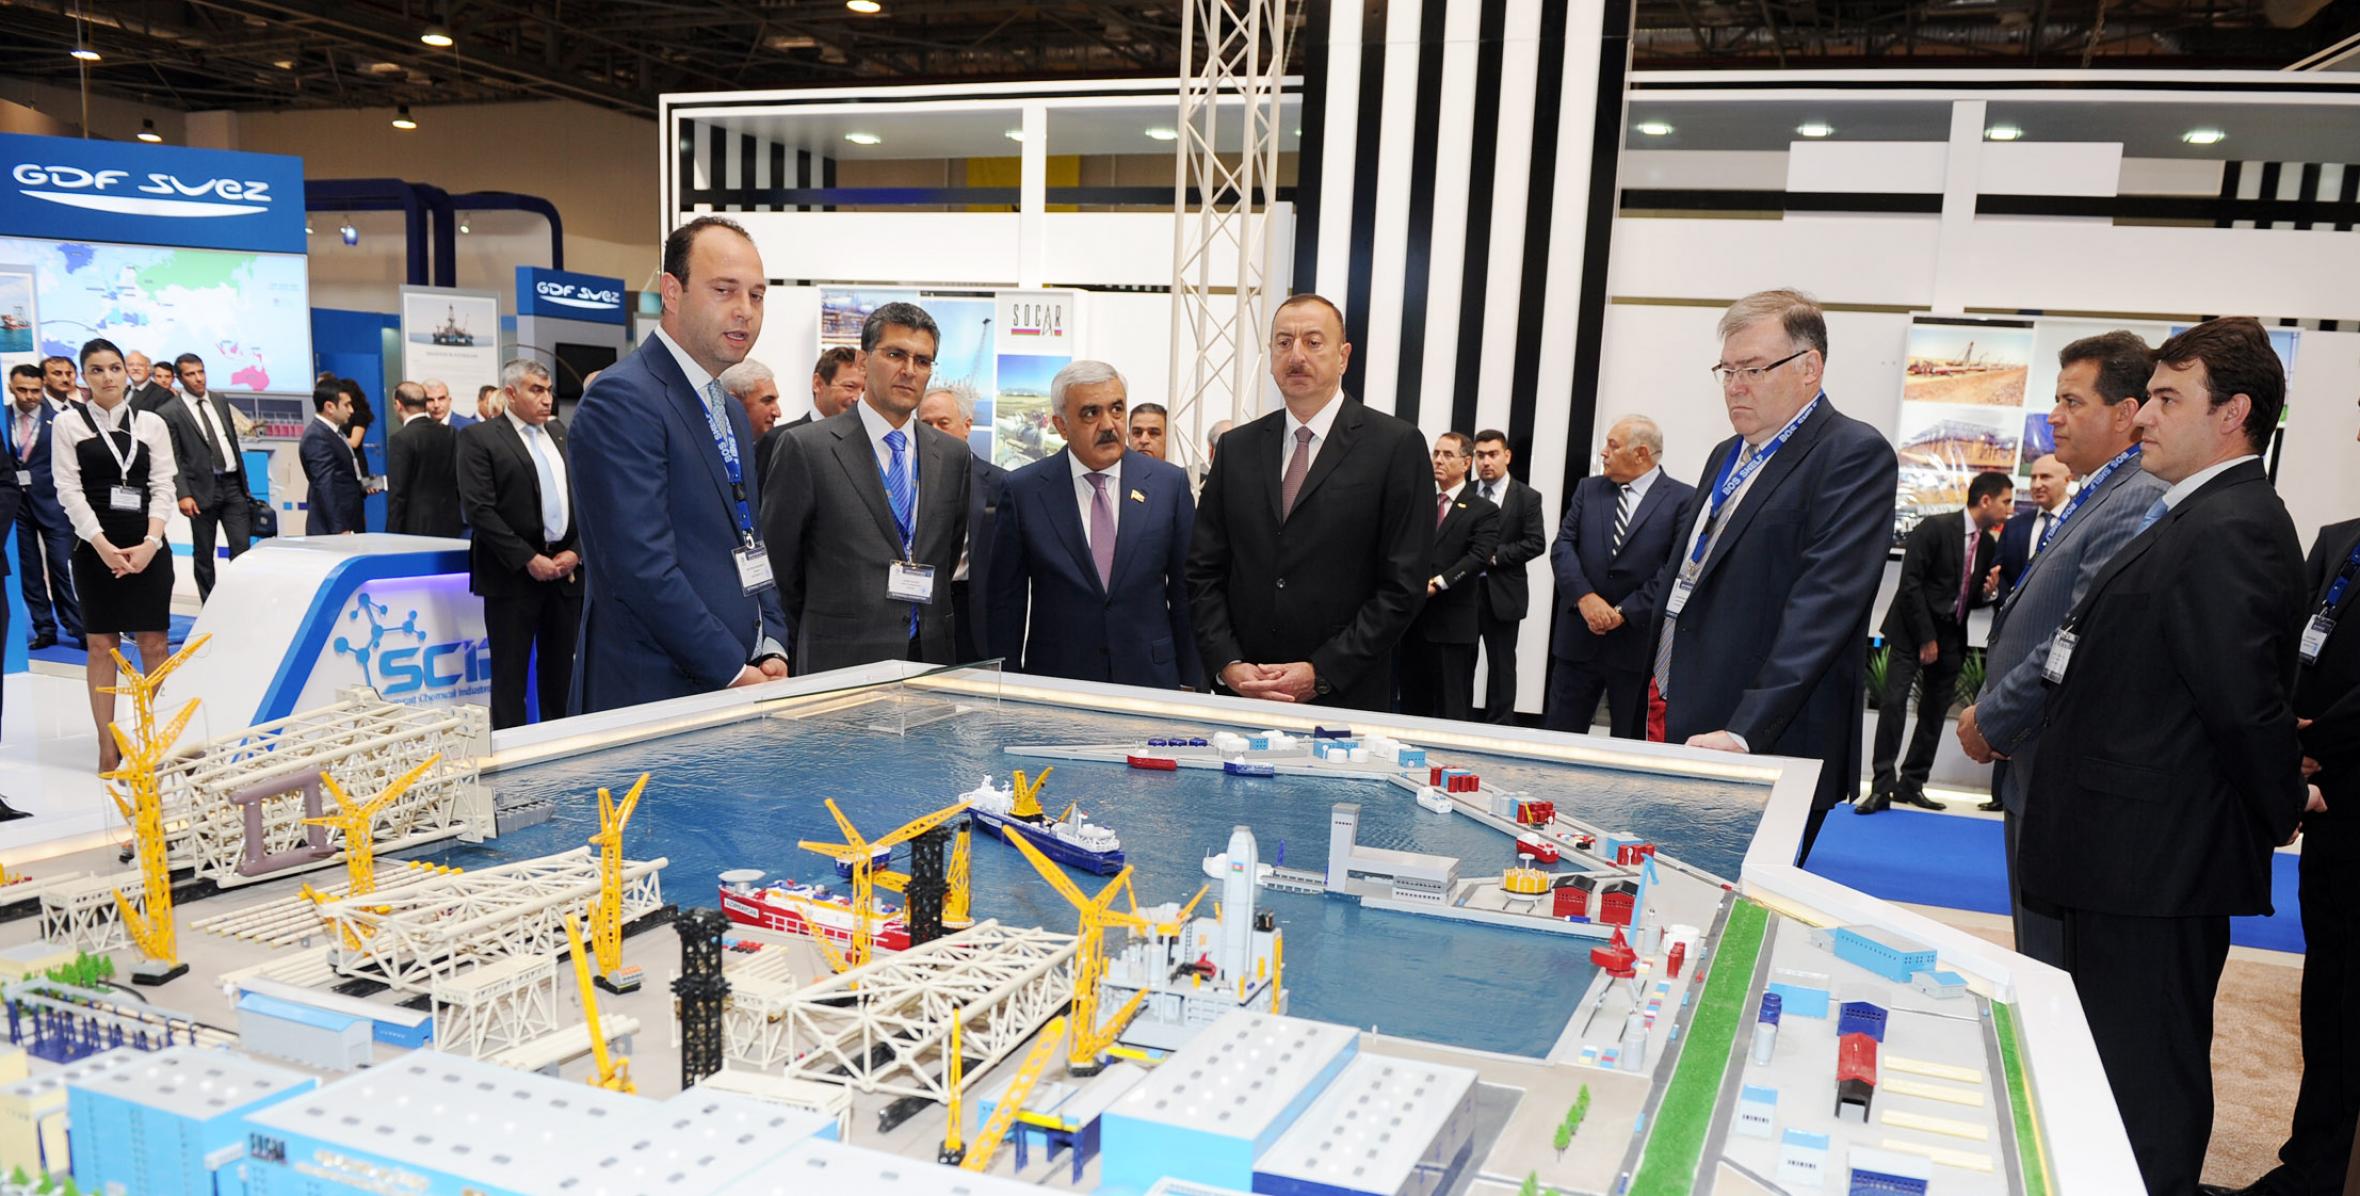 Ilham Aliyev attended the 21st International Exhibition “Caspian Oil and Gas” in Baku